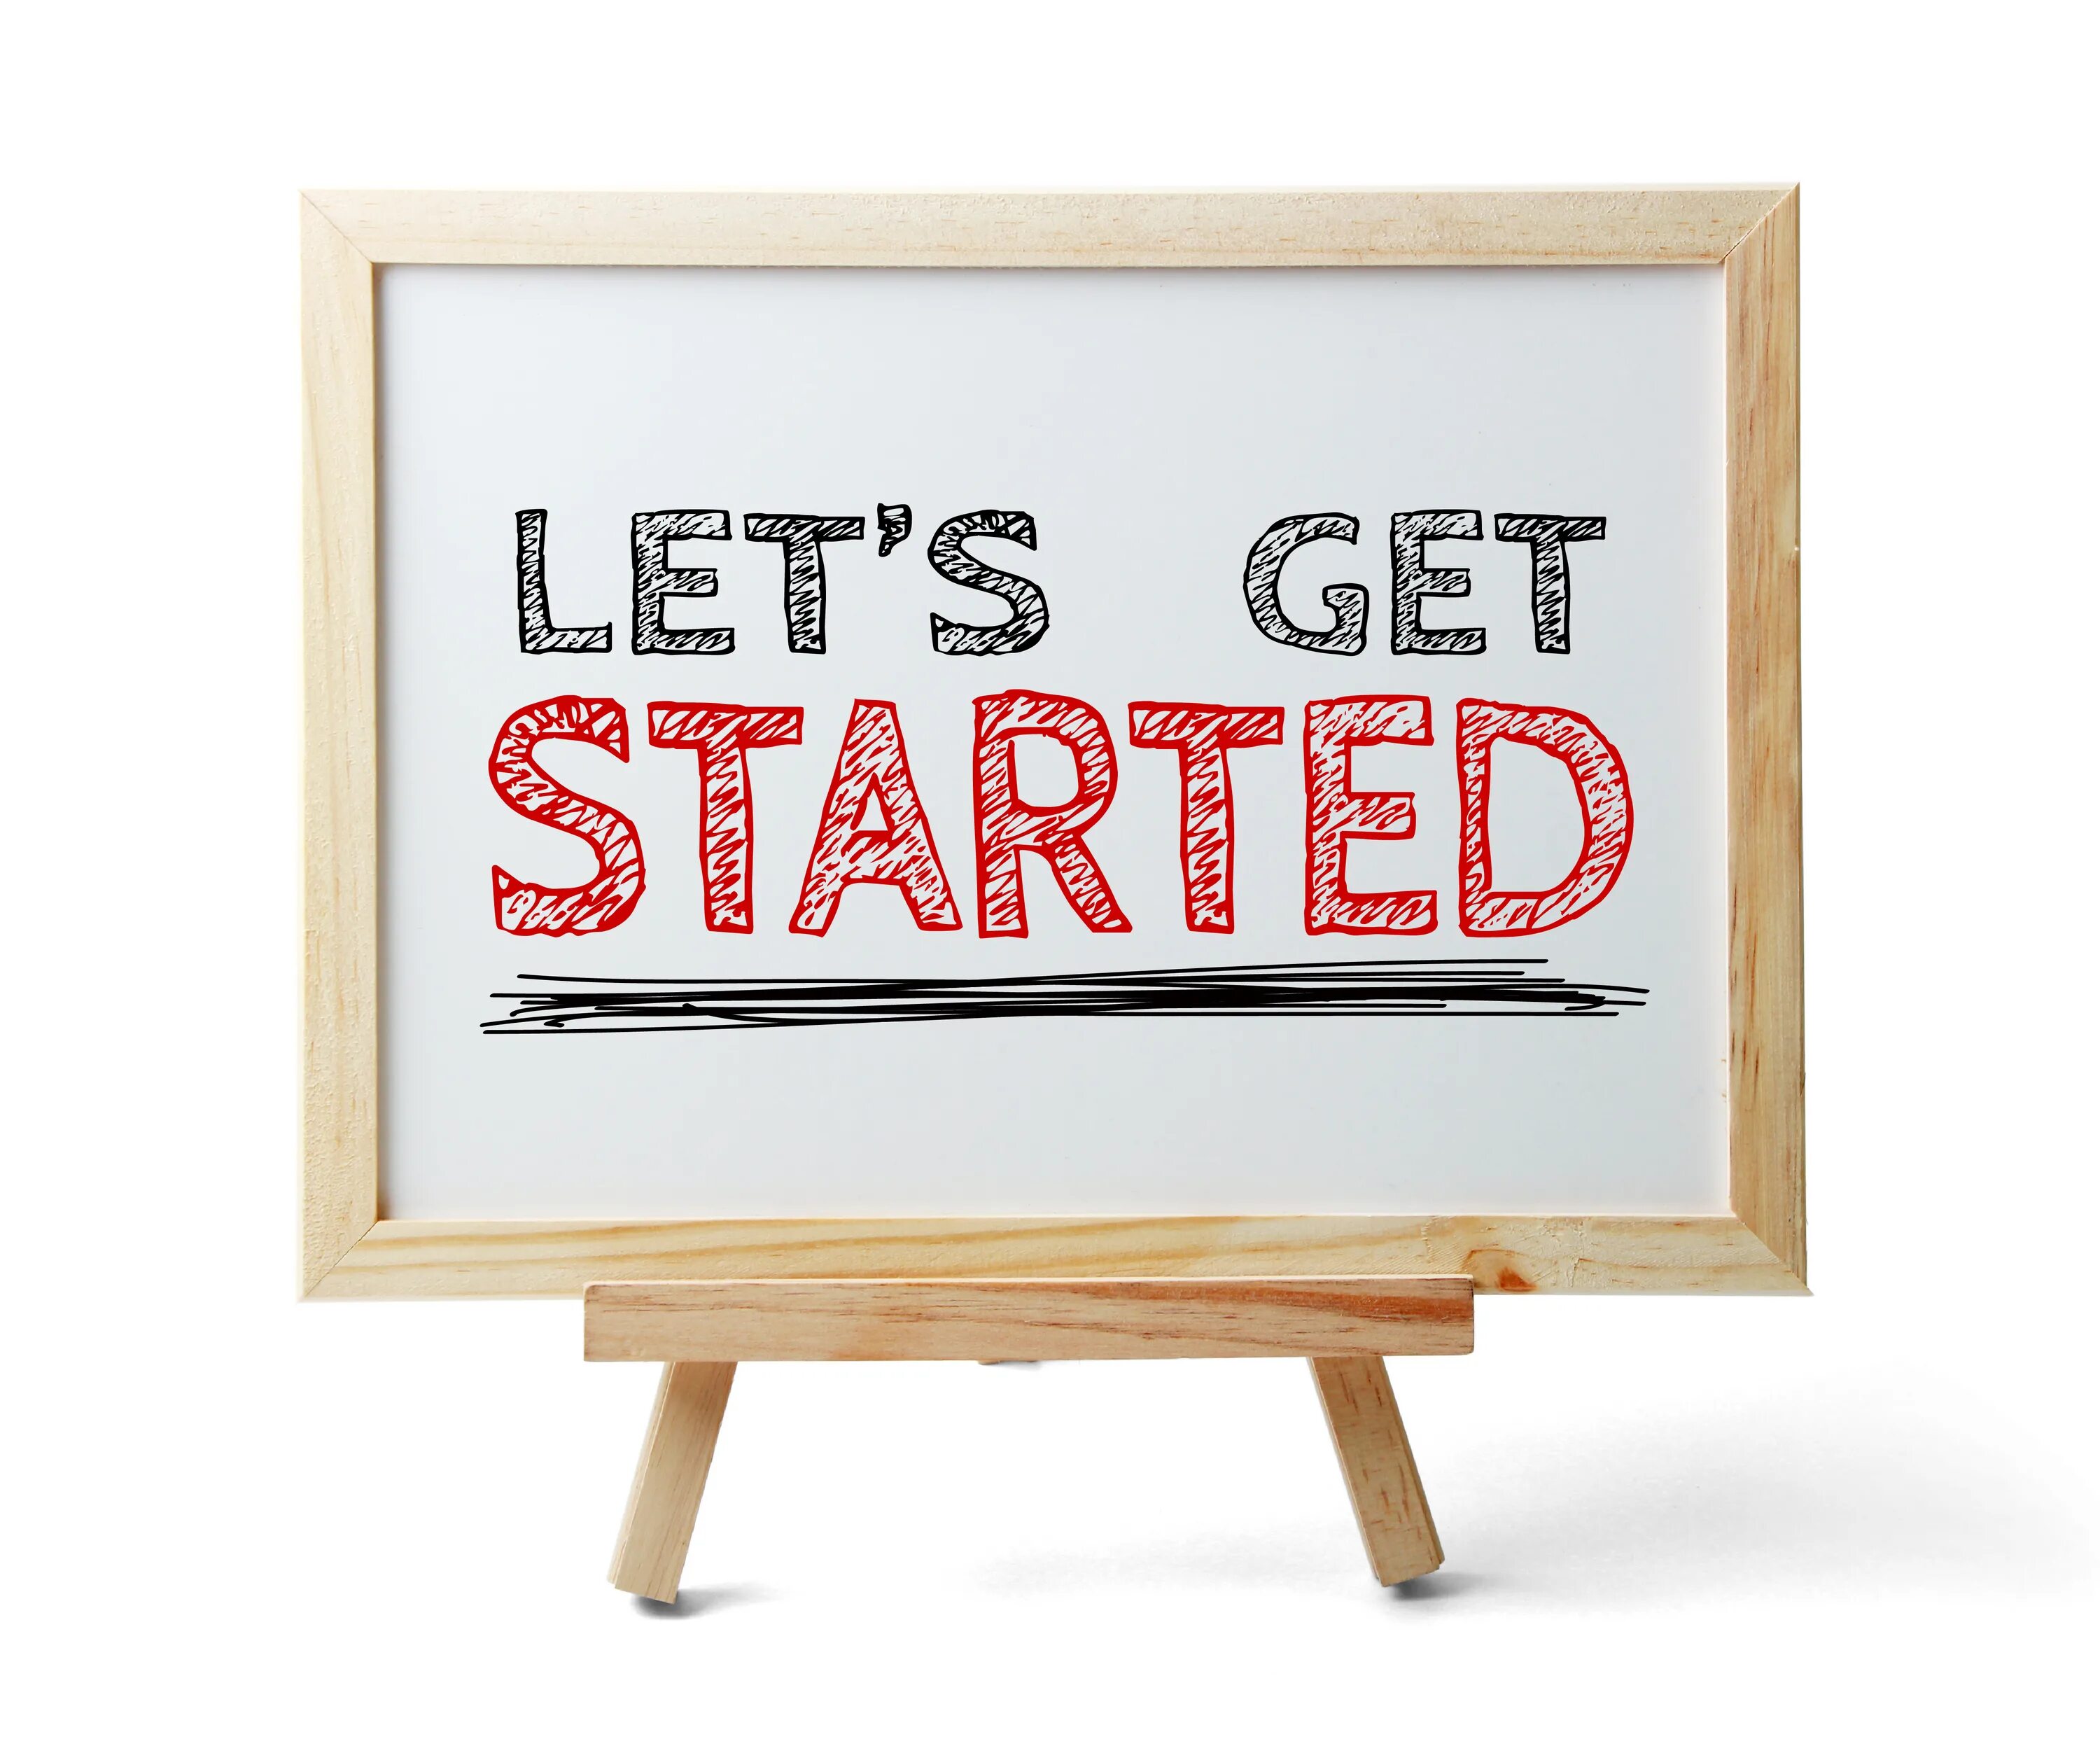 Let s get started. Картина start. Lets get it started. Let`s get started картинка. We well get started